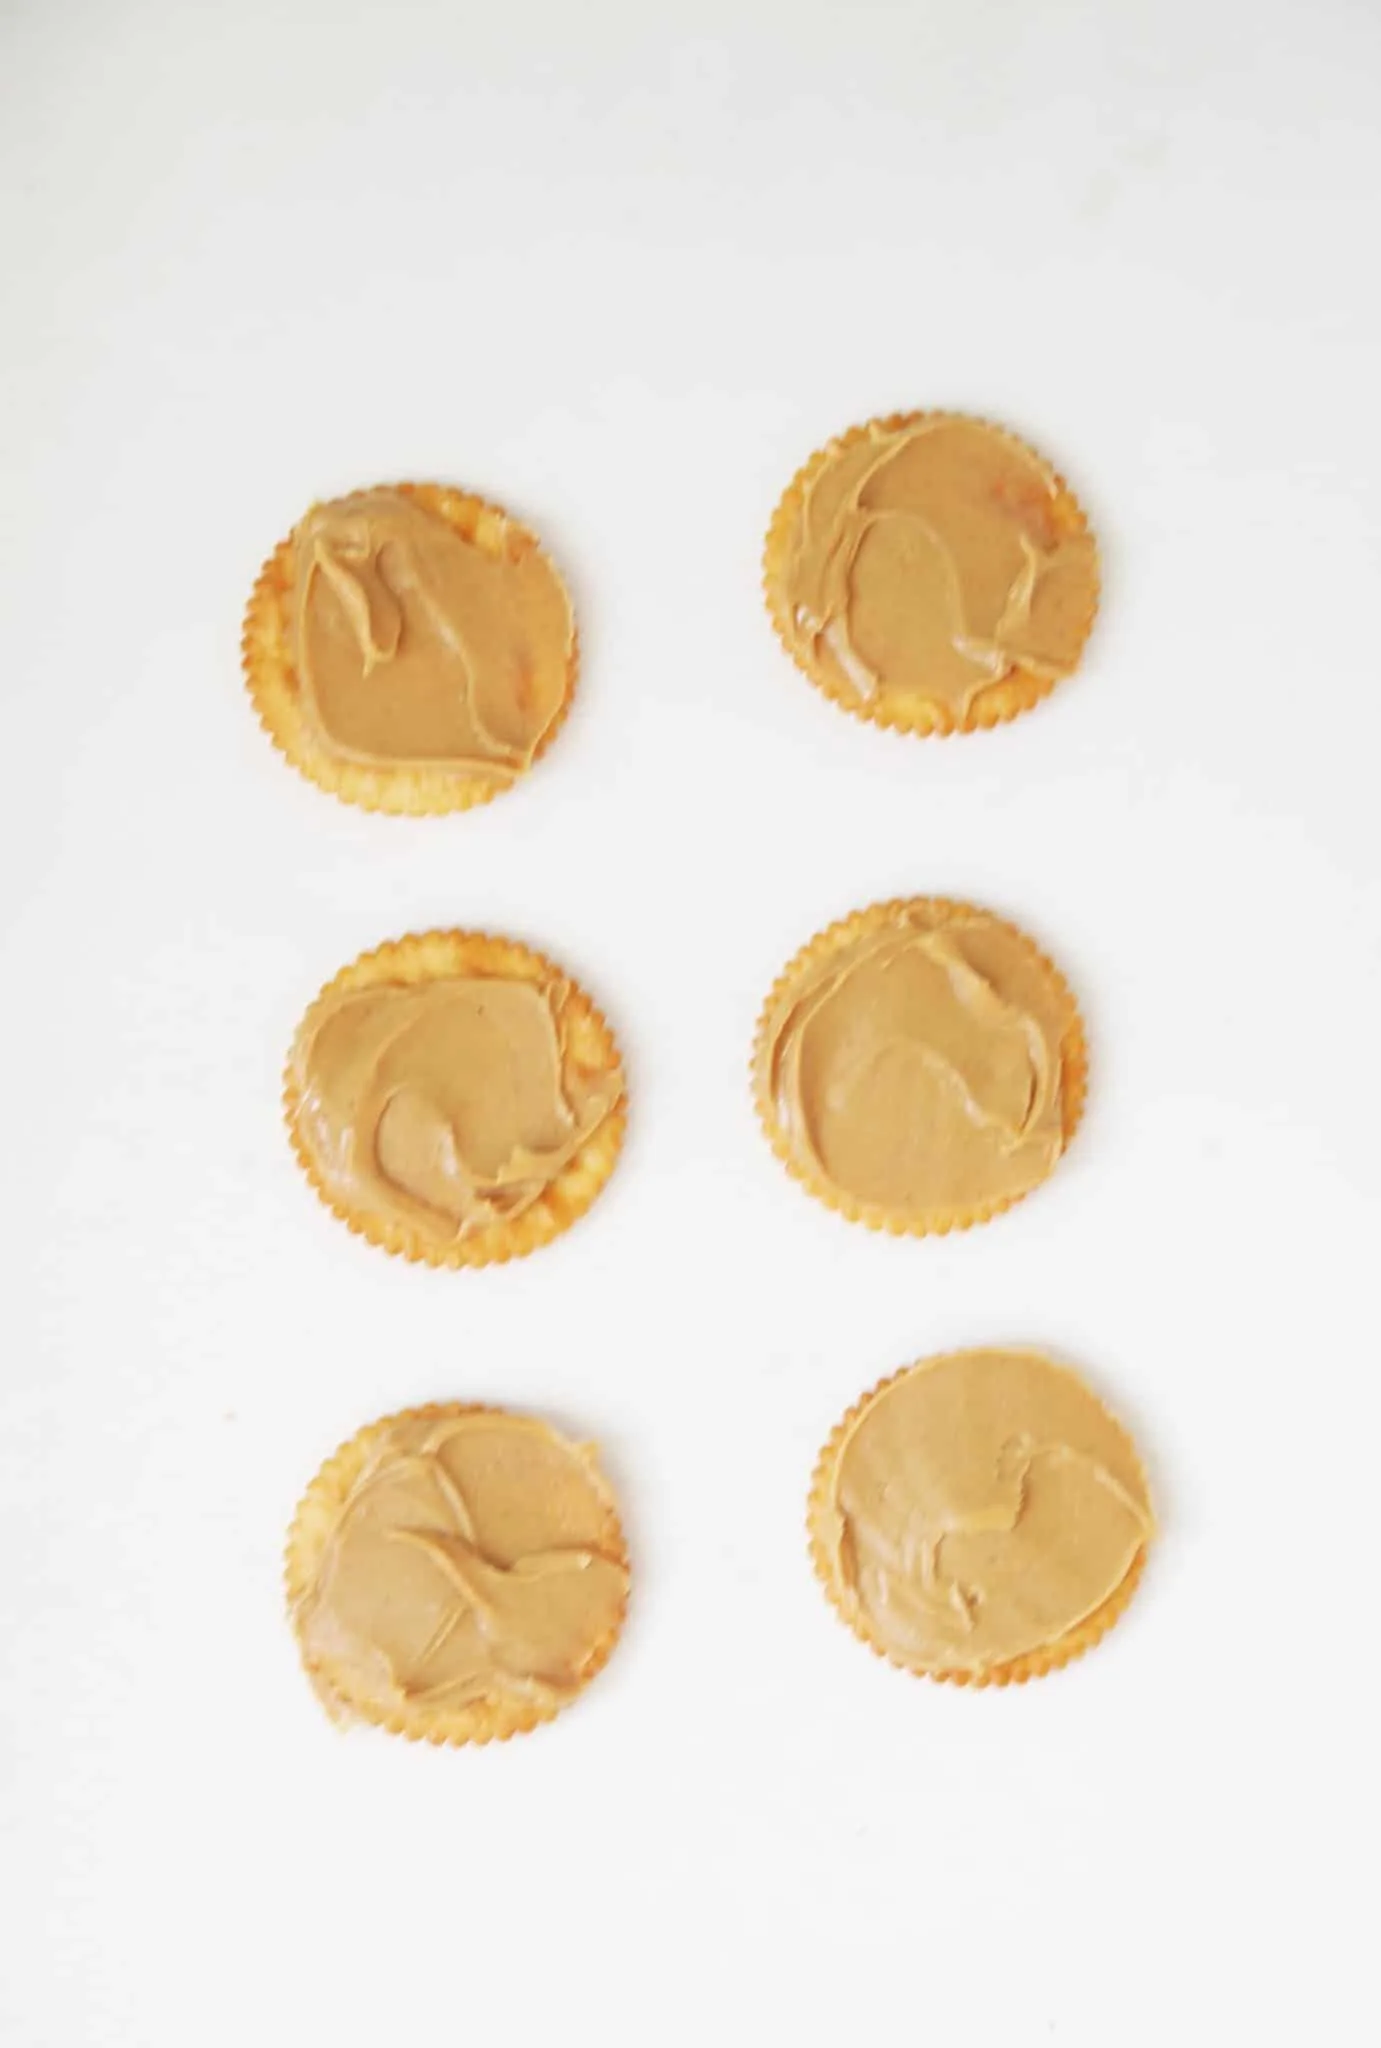 Peanut butter on top of crackers